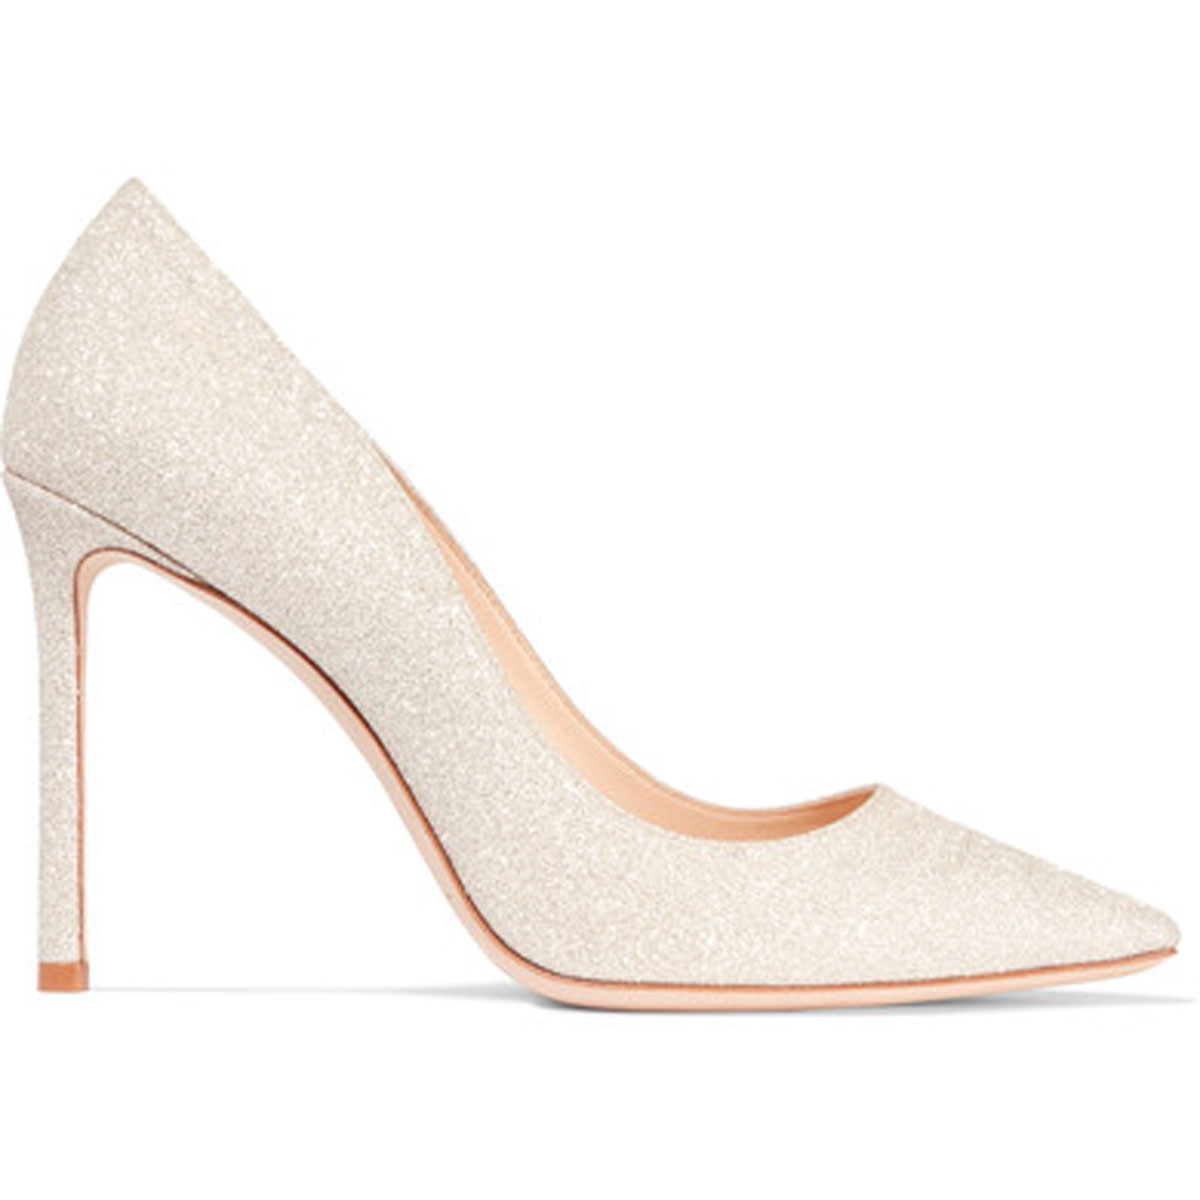 The Best Wedding Shoes for Every Bride 